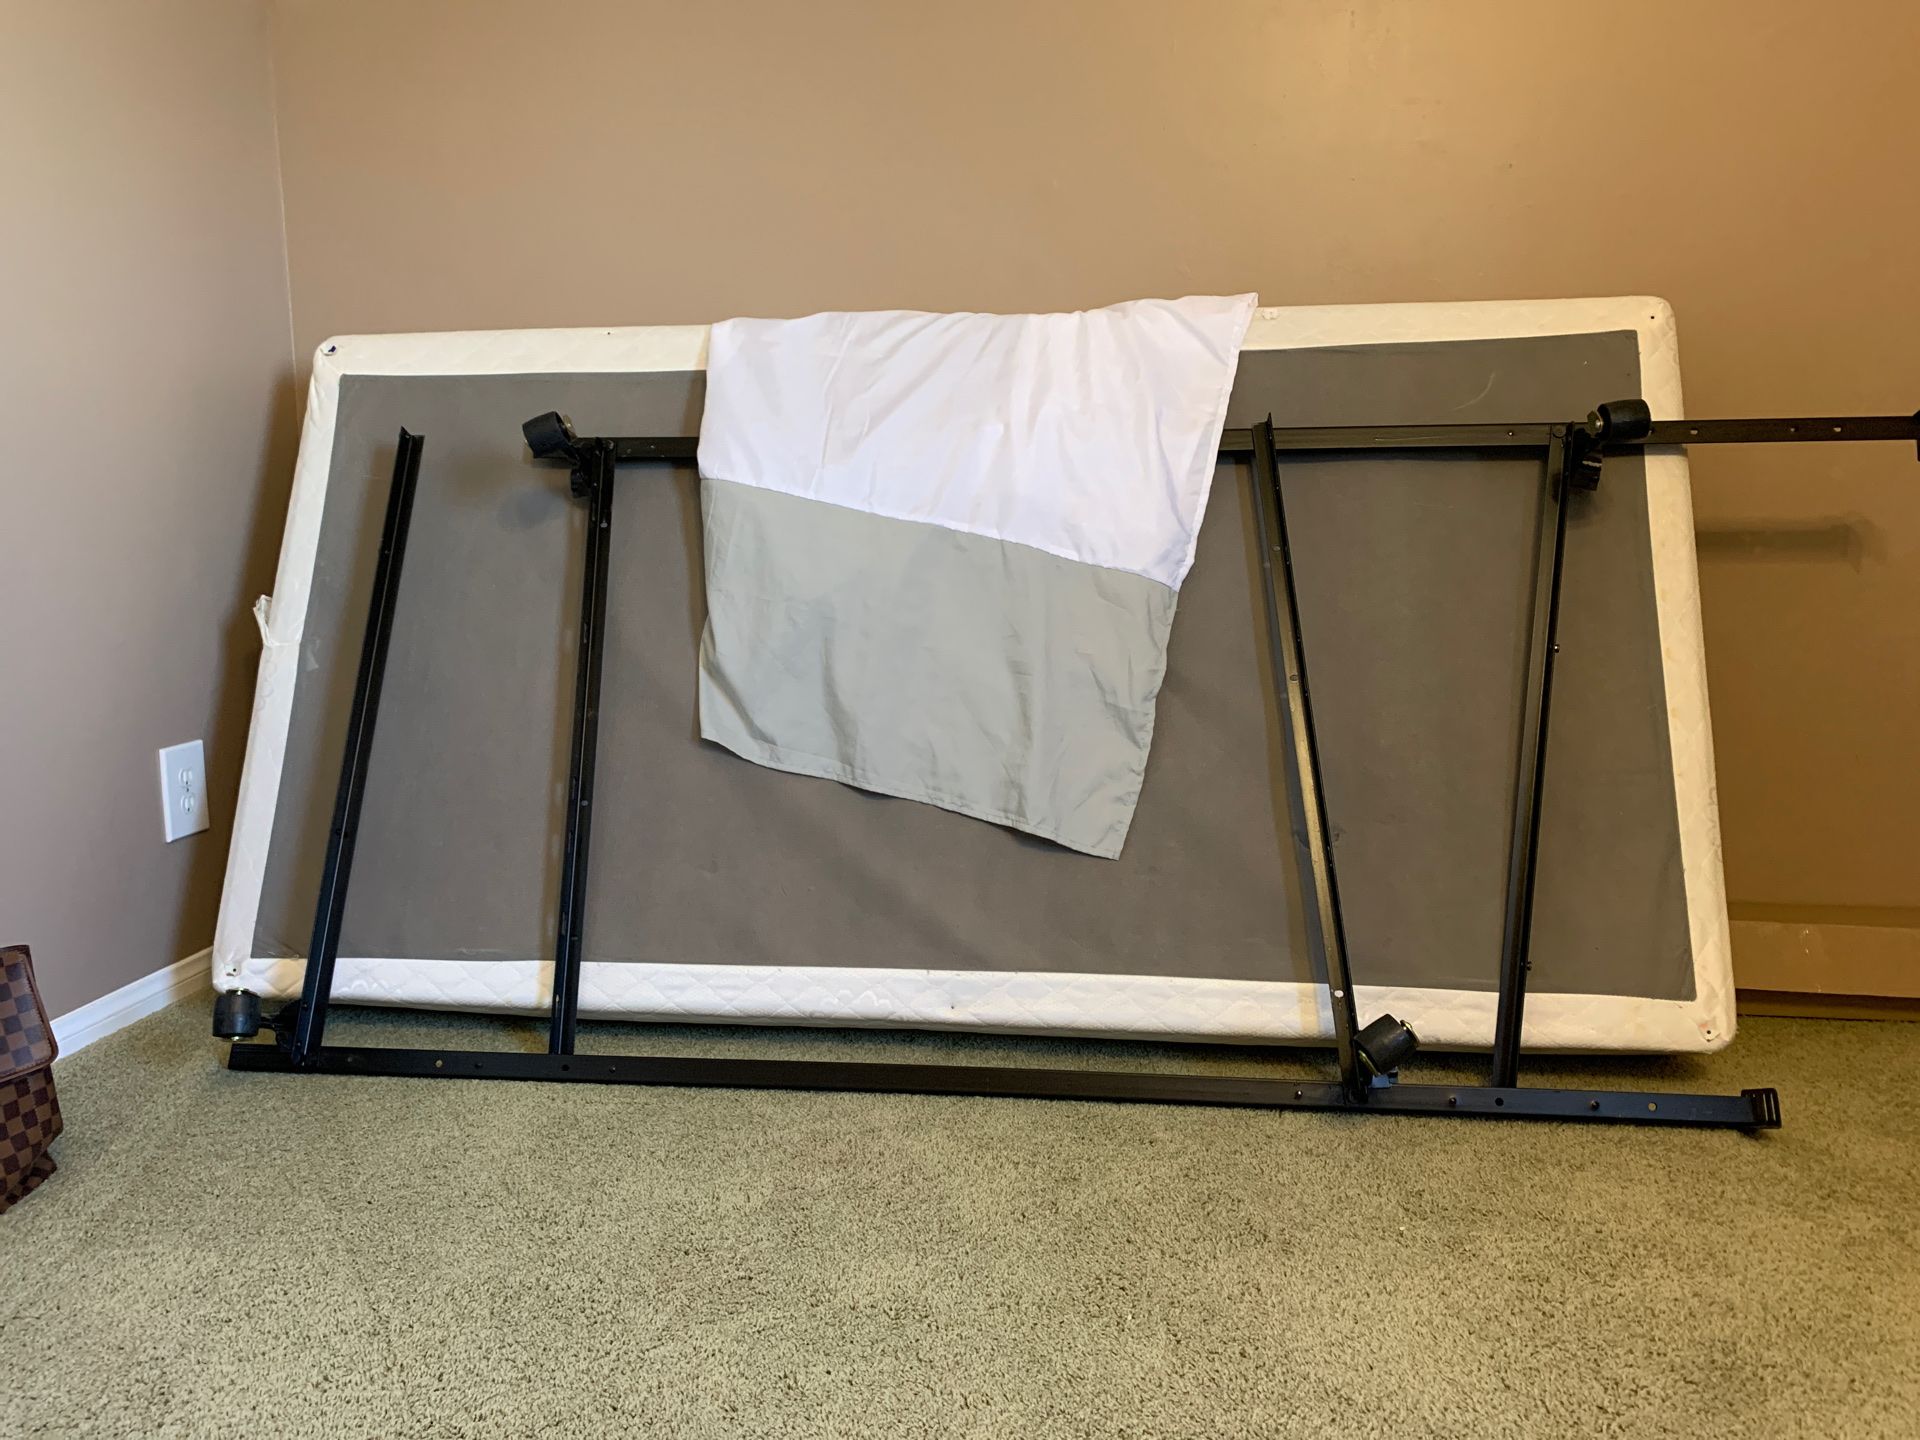 Twin size box spring, bed skirt and bed rail